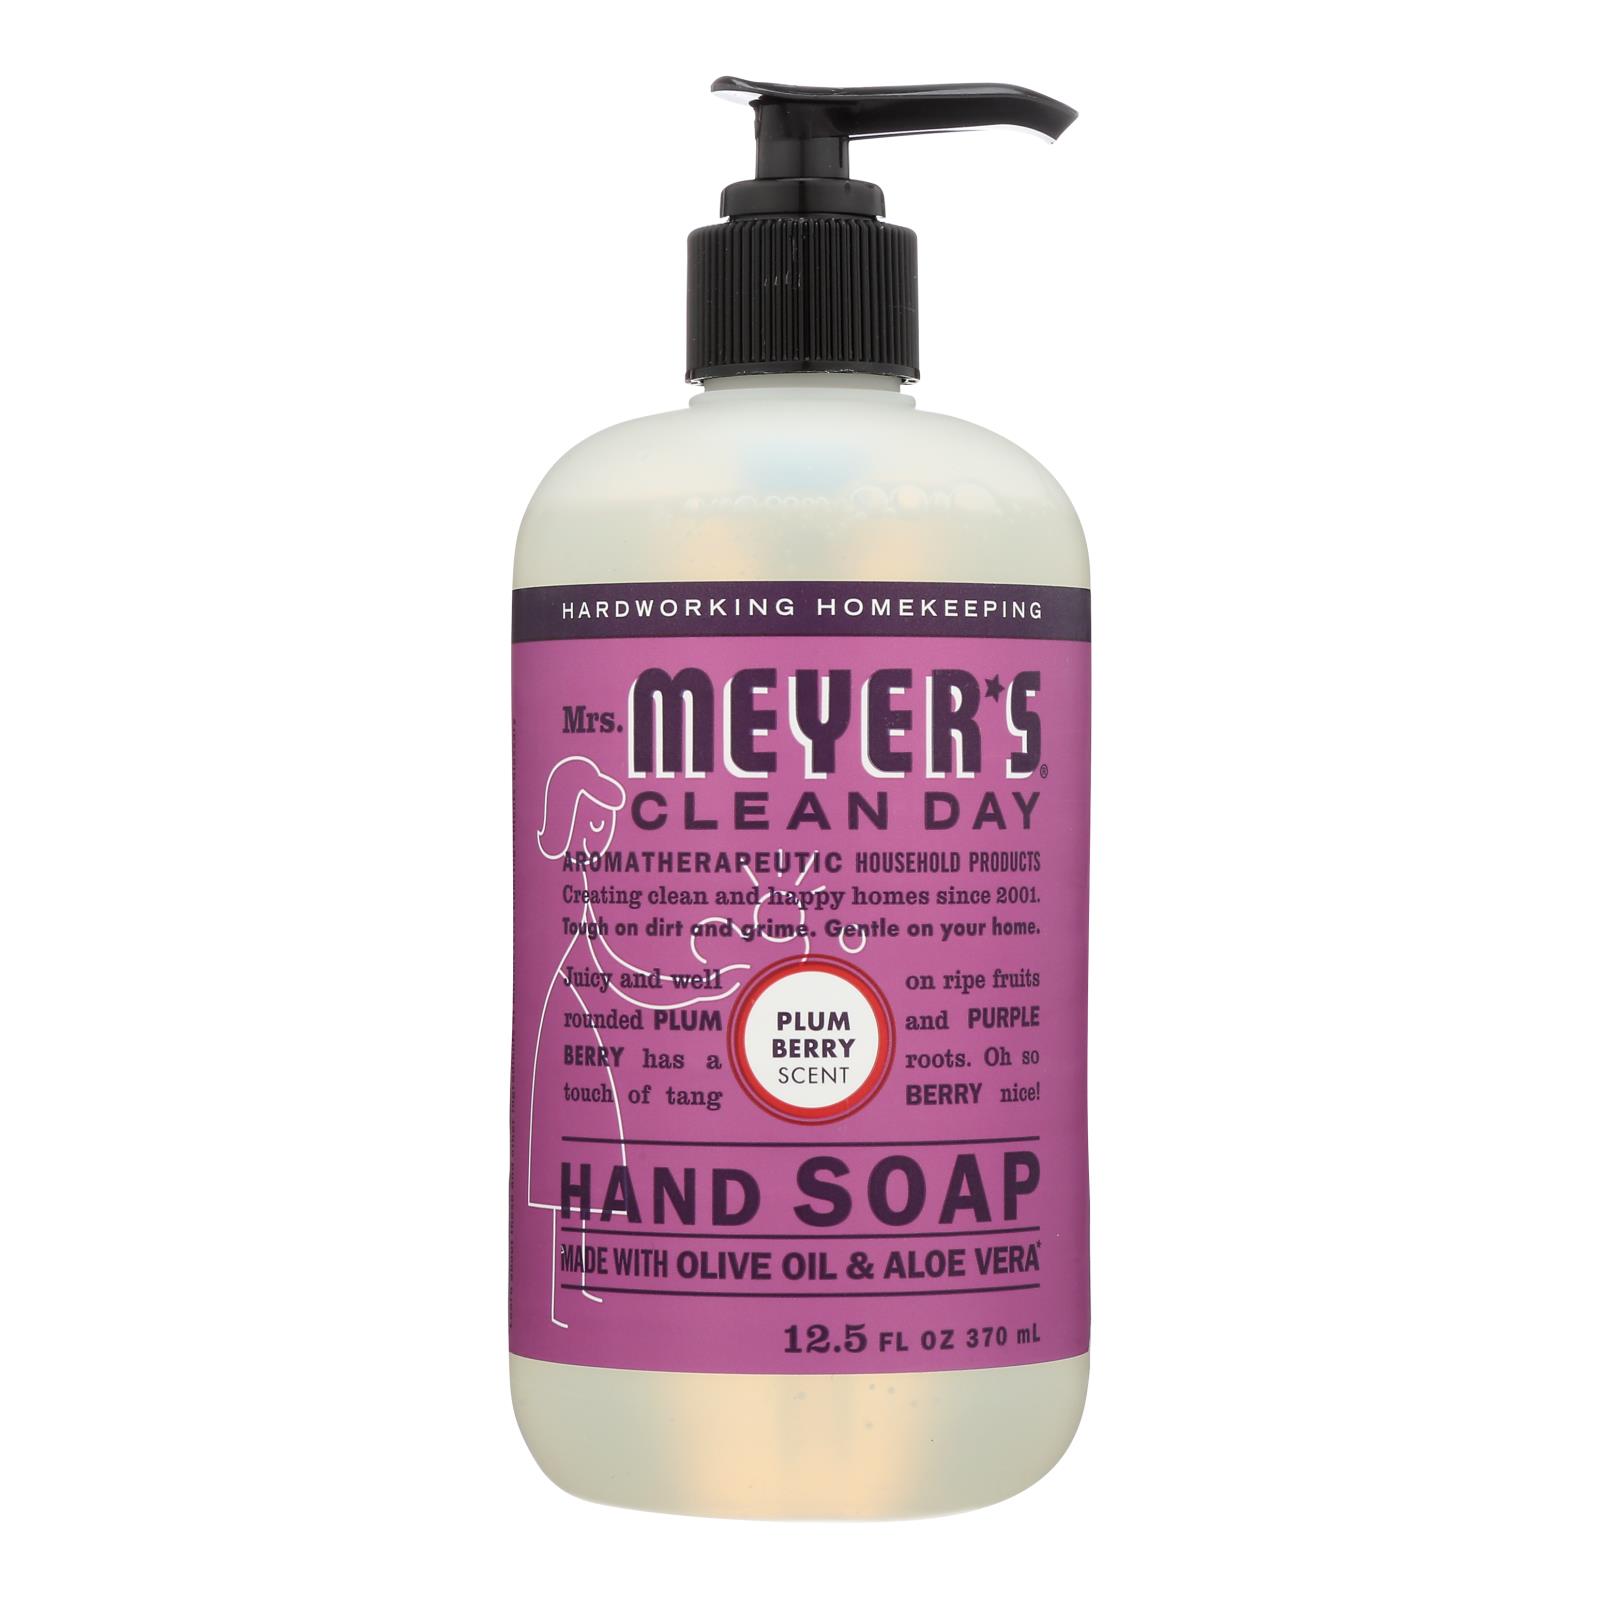 Mrs.meyers Clean Day - Hand Soap Liquid Plumberry - Case of 6 - 12.5 FZ